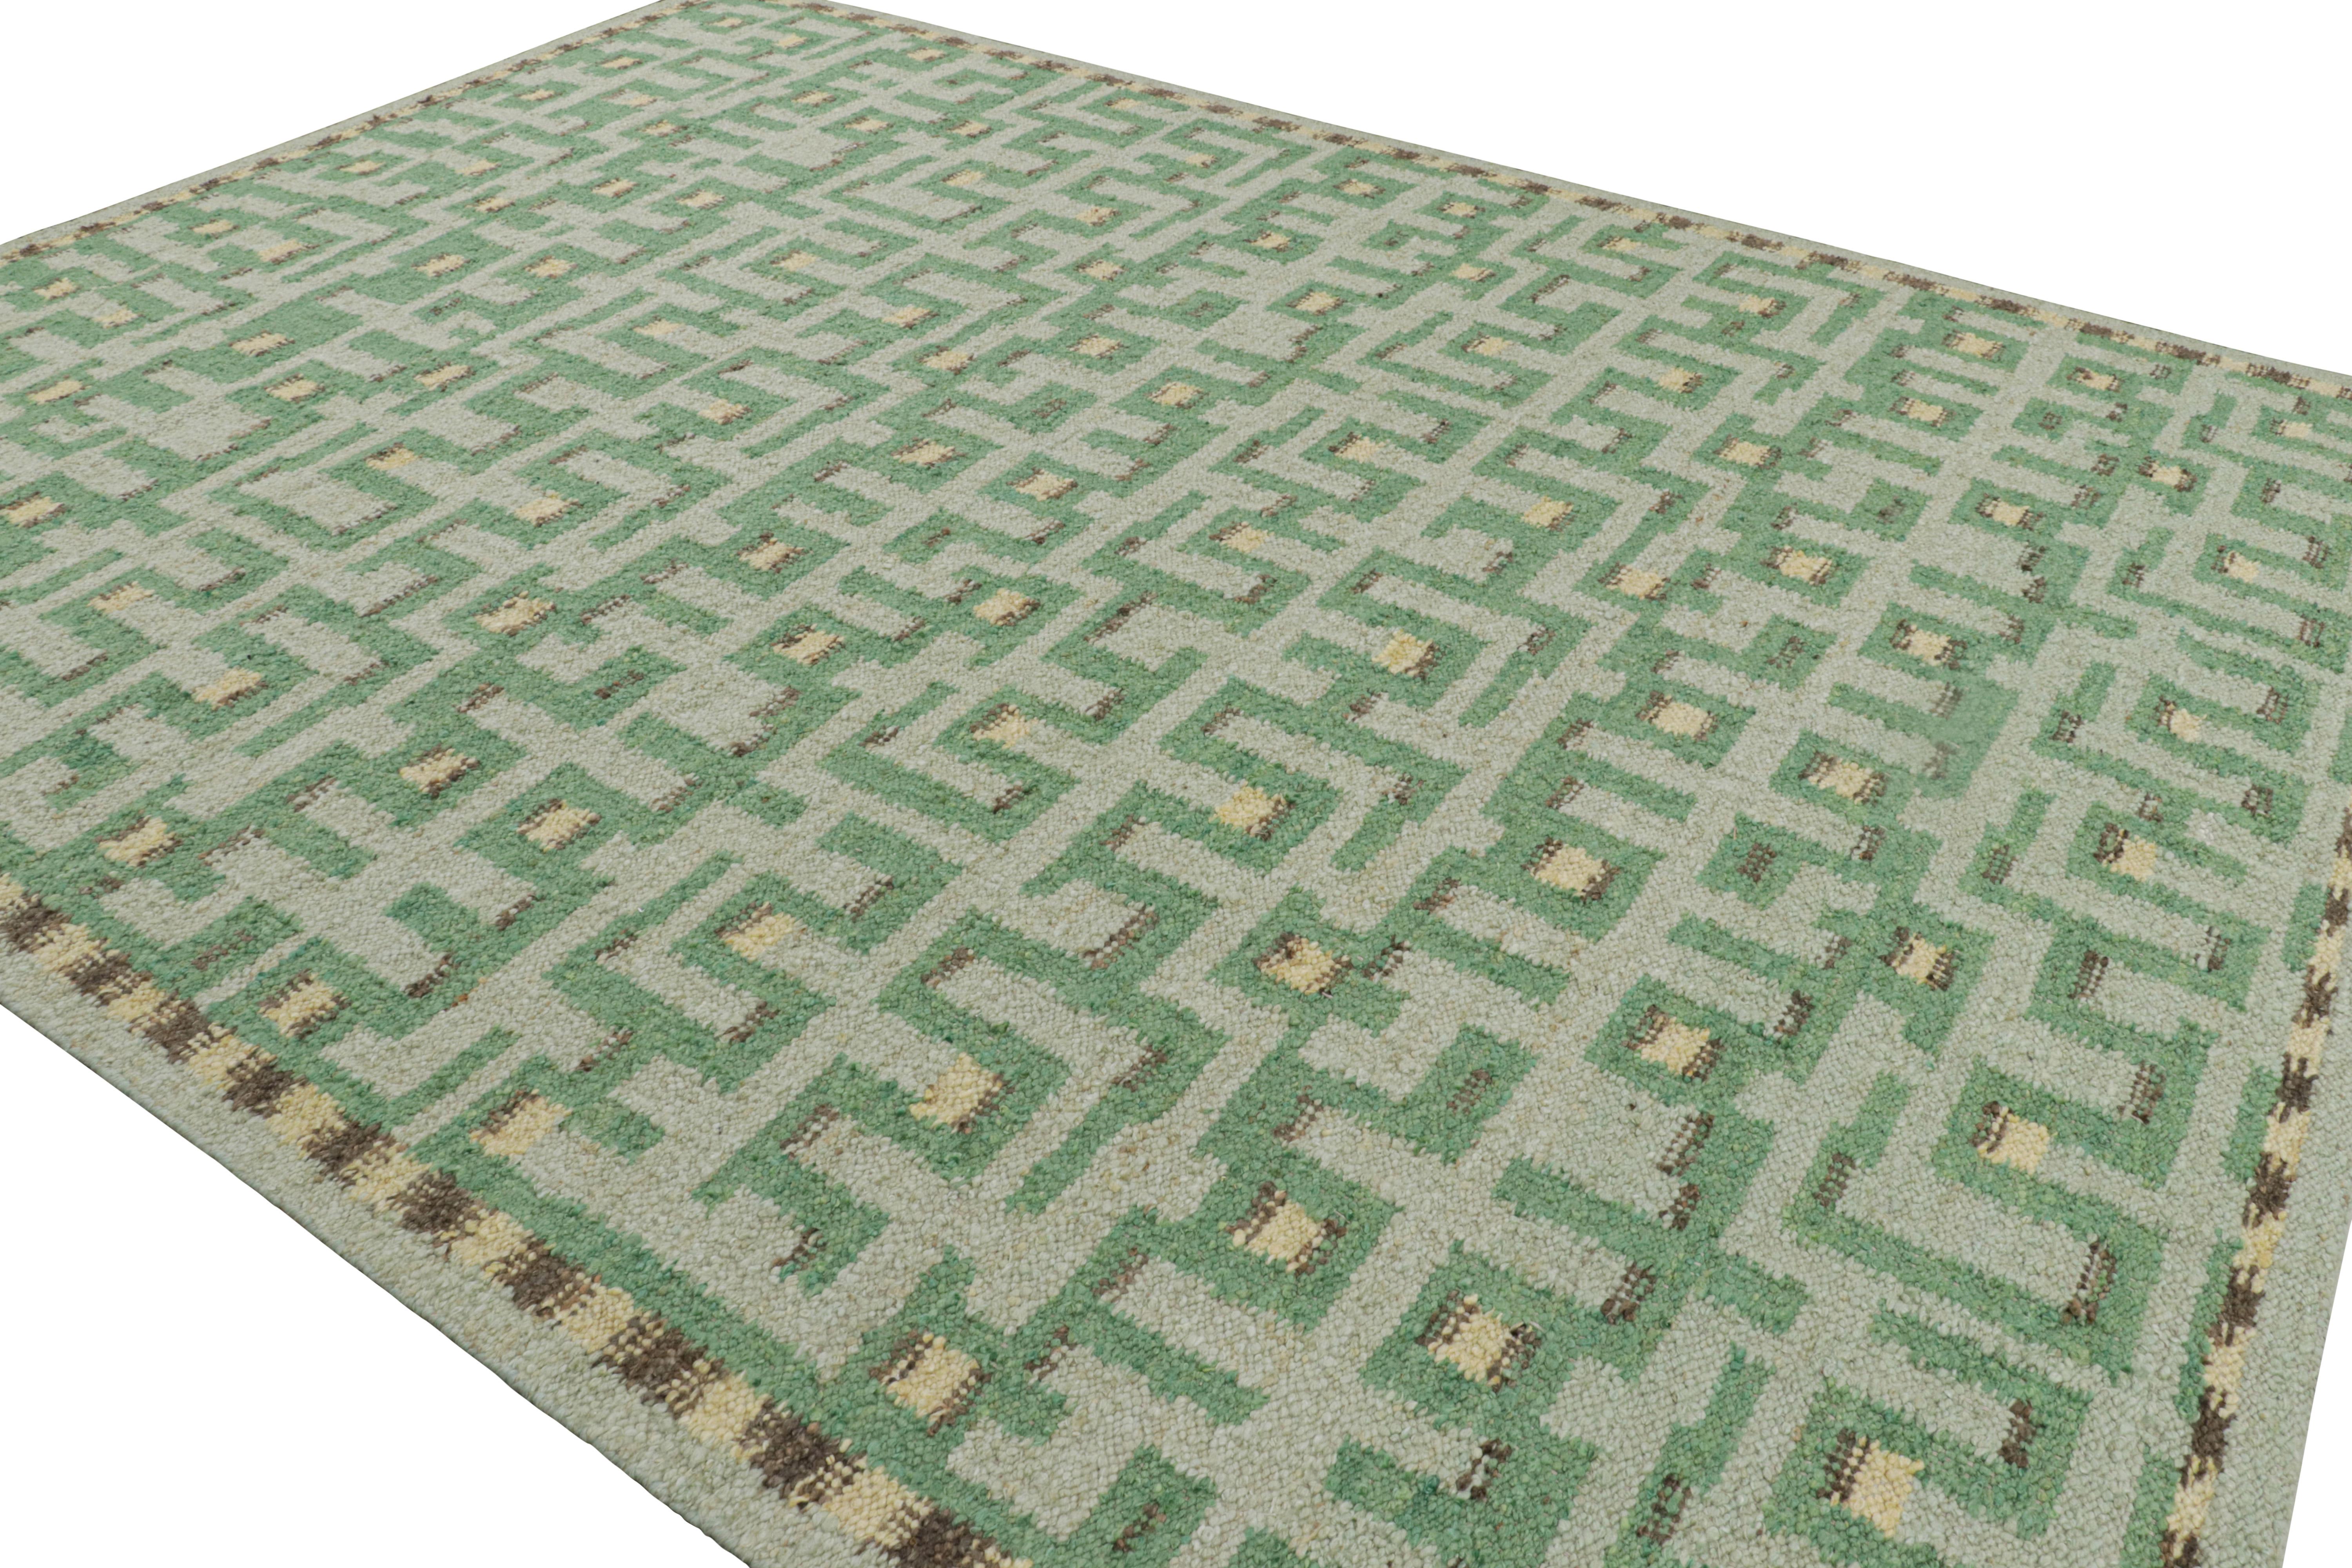 Indian Rug & Kilim’s Scandinavian Style Rug in Green Tones with Geometric Patterns For Sale